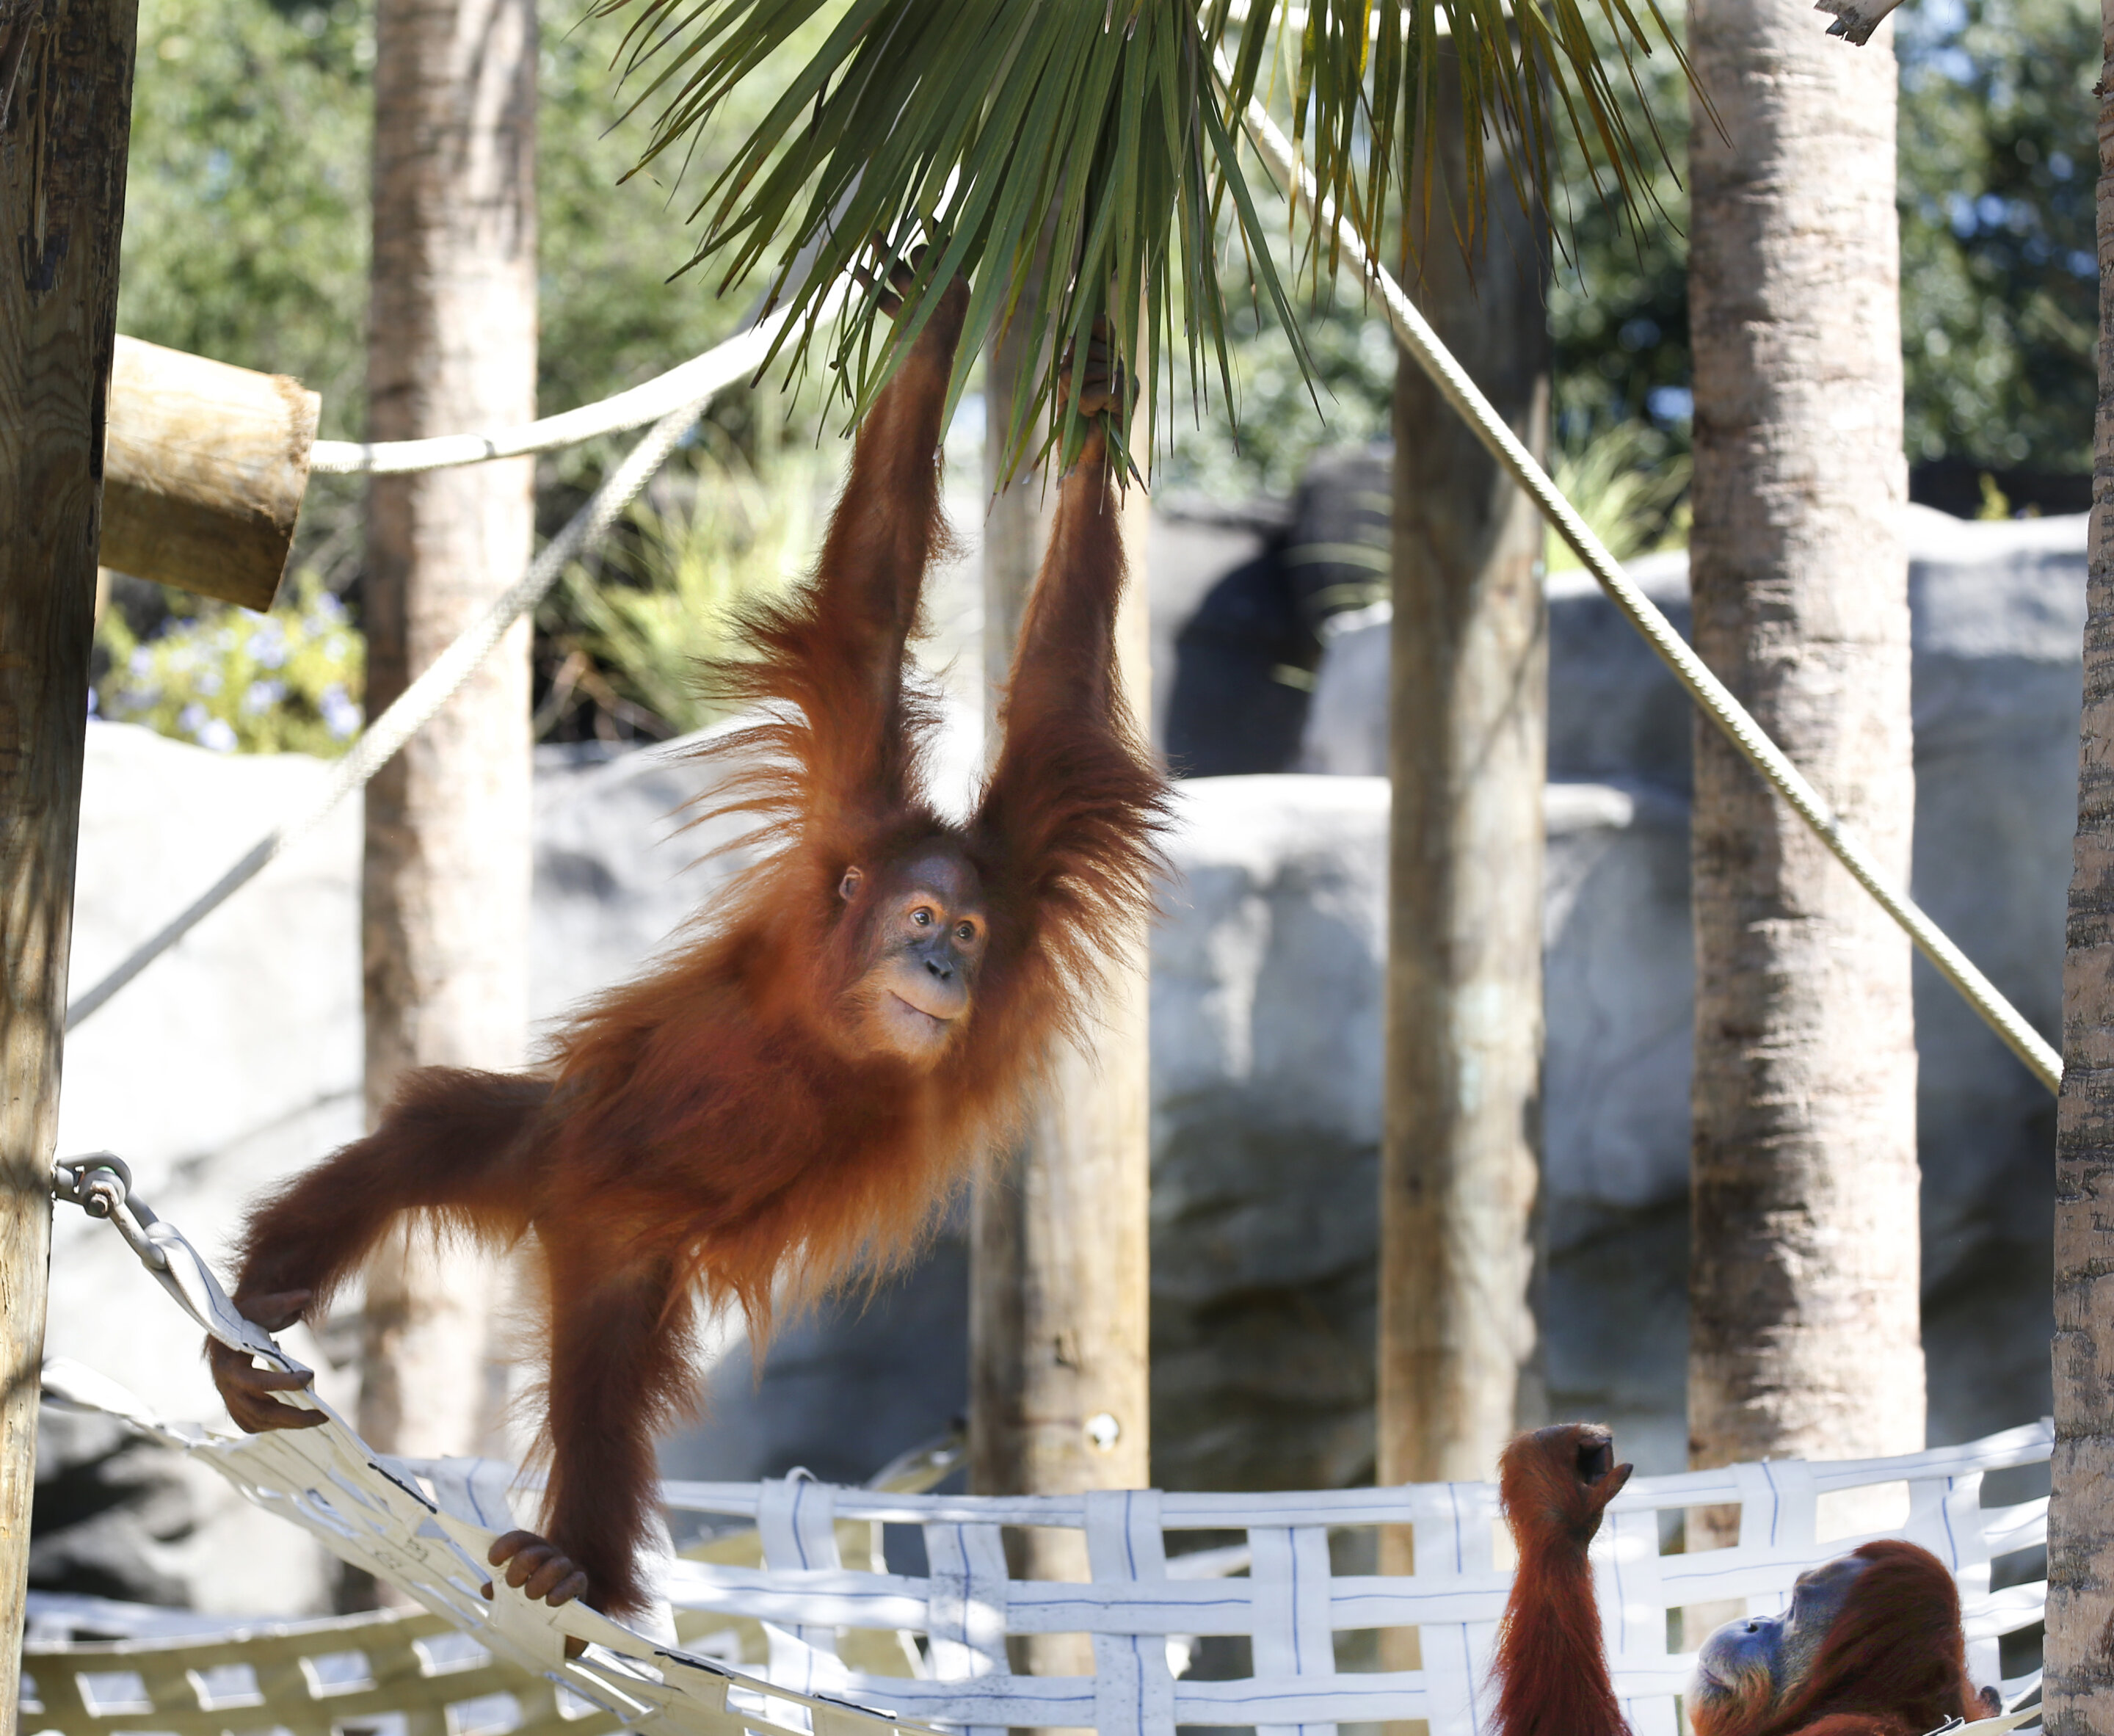 photo of Endangered orangutan in New Orleans expecting twins image